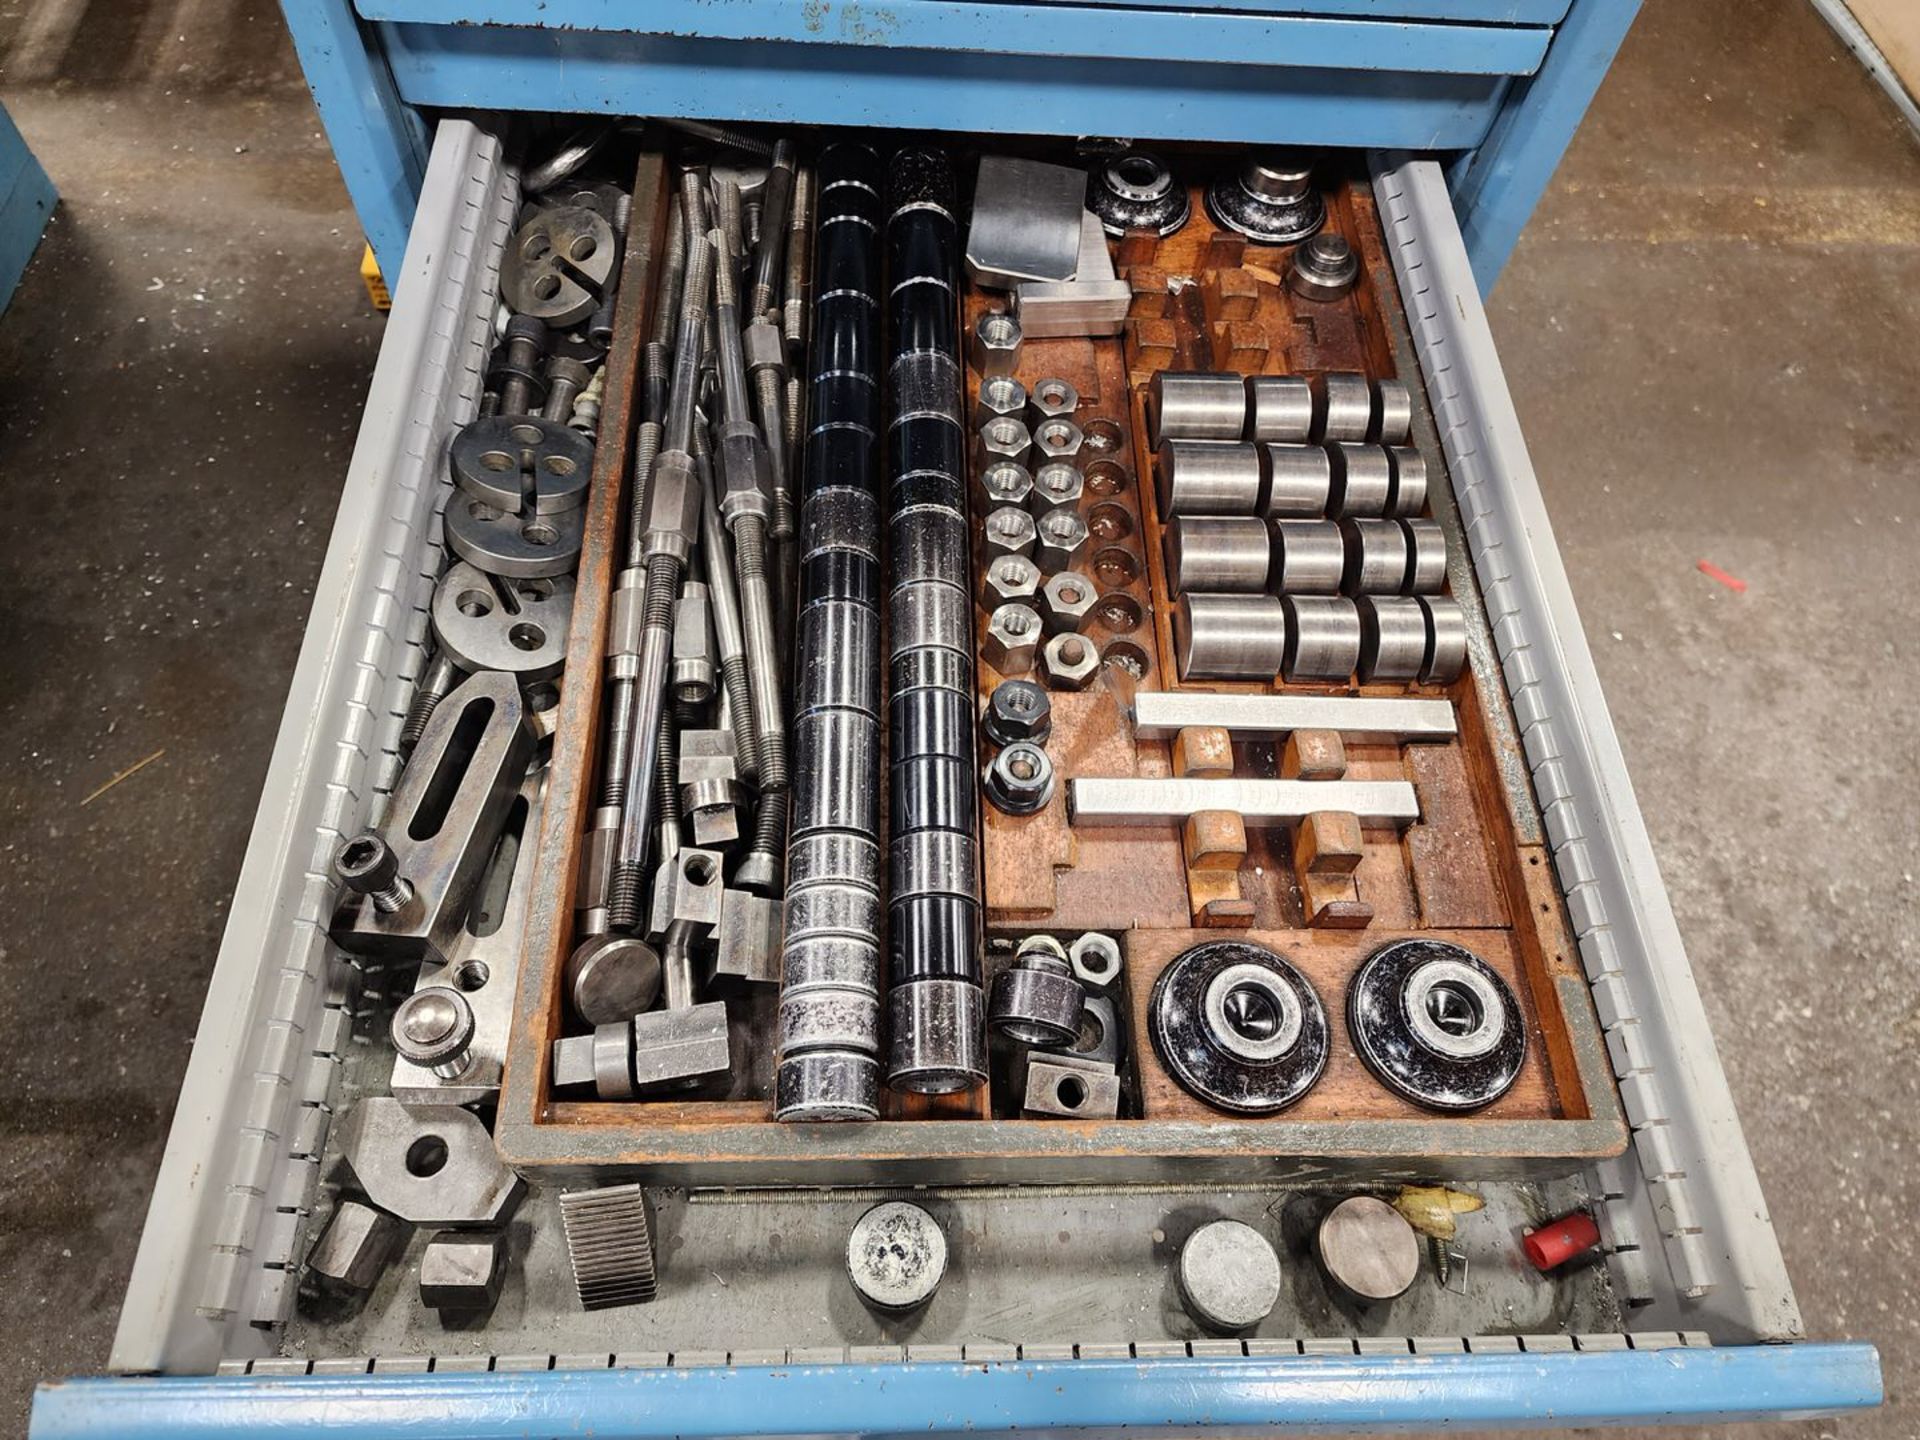 2-Bin Modular Material Cabinet W/ Jig Boring Machine Contents & Other Assorted Contents - Image 18 of 20